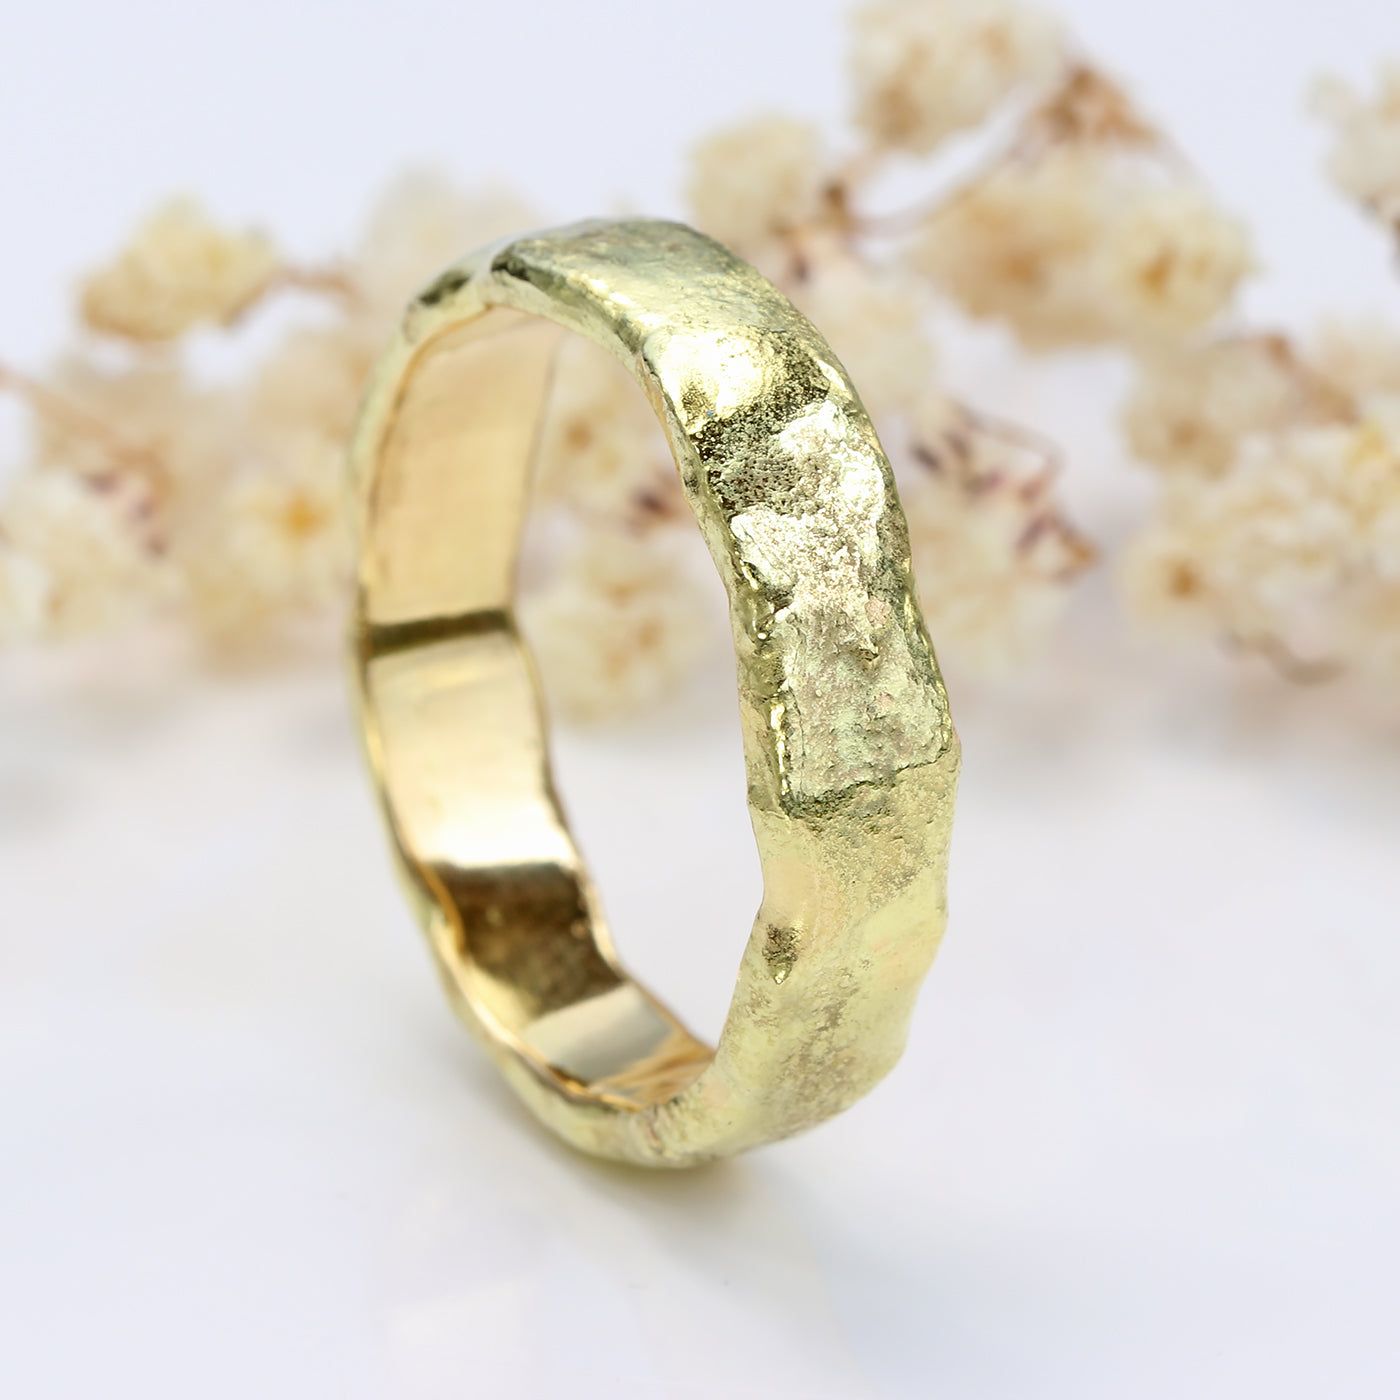 5mm Mineral Wedding Ring in 18ct Gold – Size T (resize G to T 1/2)